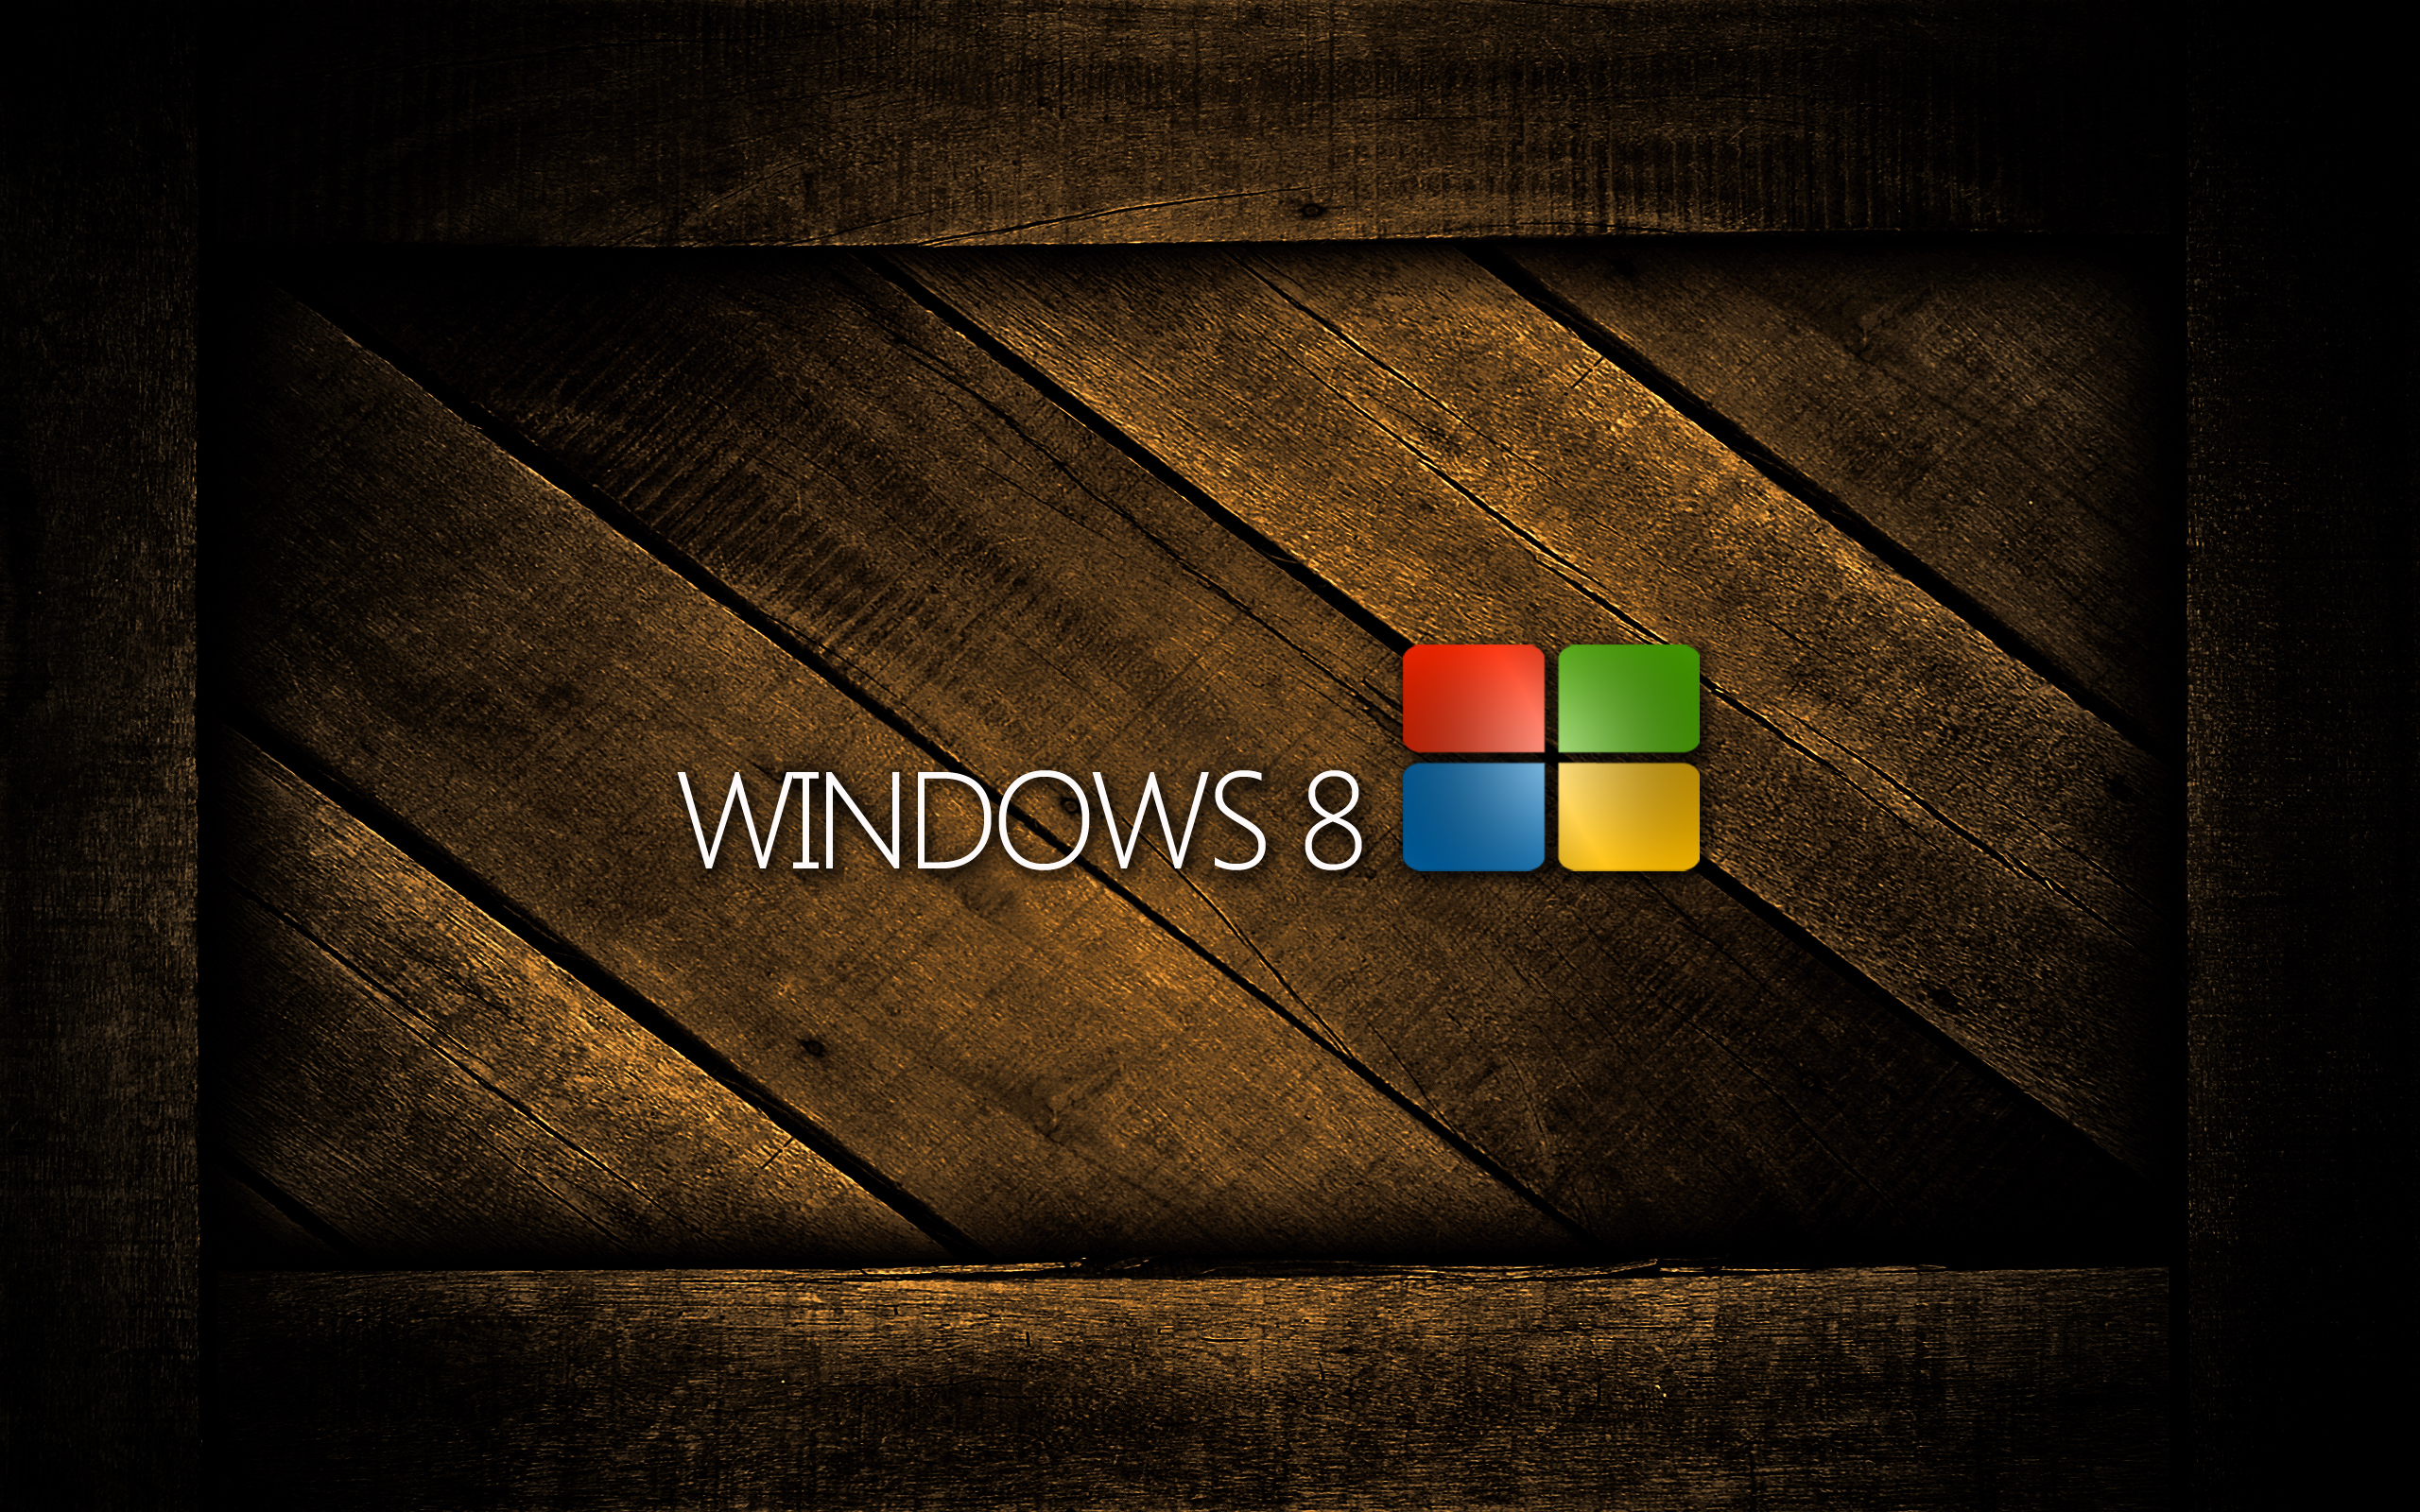 HD Wallpapers for Windows 8 Wallpapers, Backgrounds, Images, Art